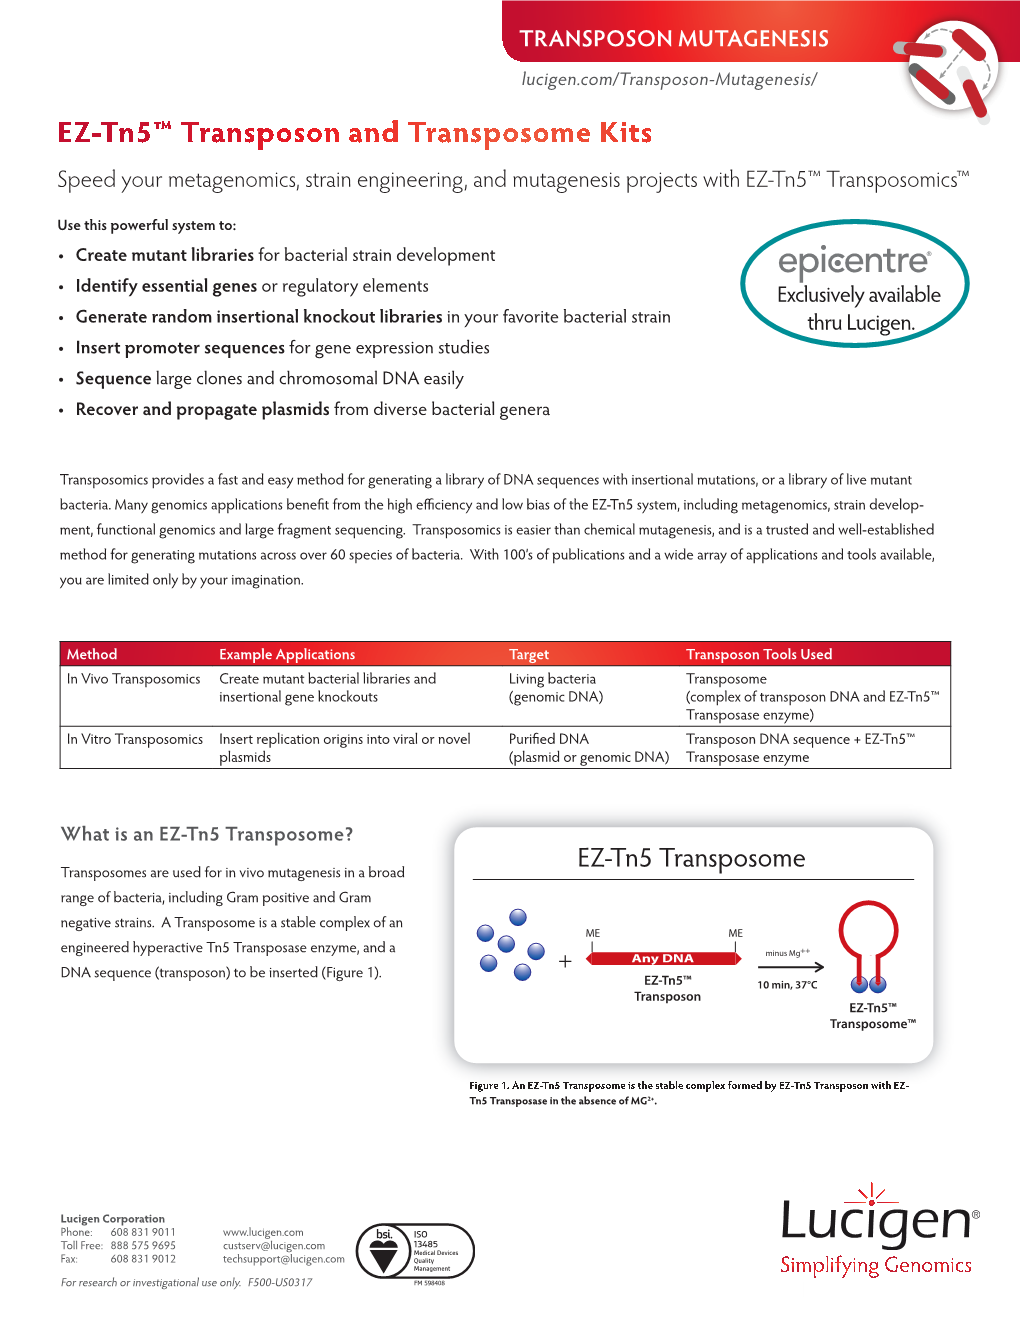 EZ-Tn5™ Transposon and Transposome Kits Speed Your Metagenomics, Strain Engineering, and Mutagenesis Projects with EZ-Tn5™ Transposomics™